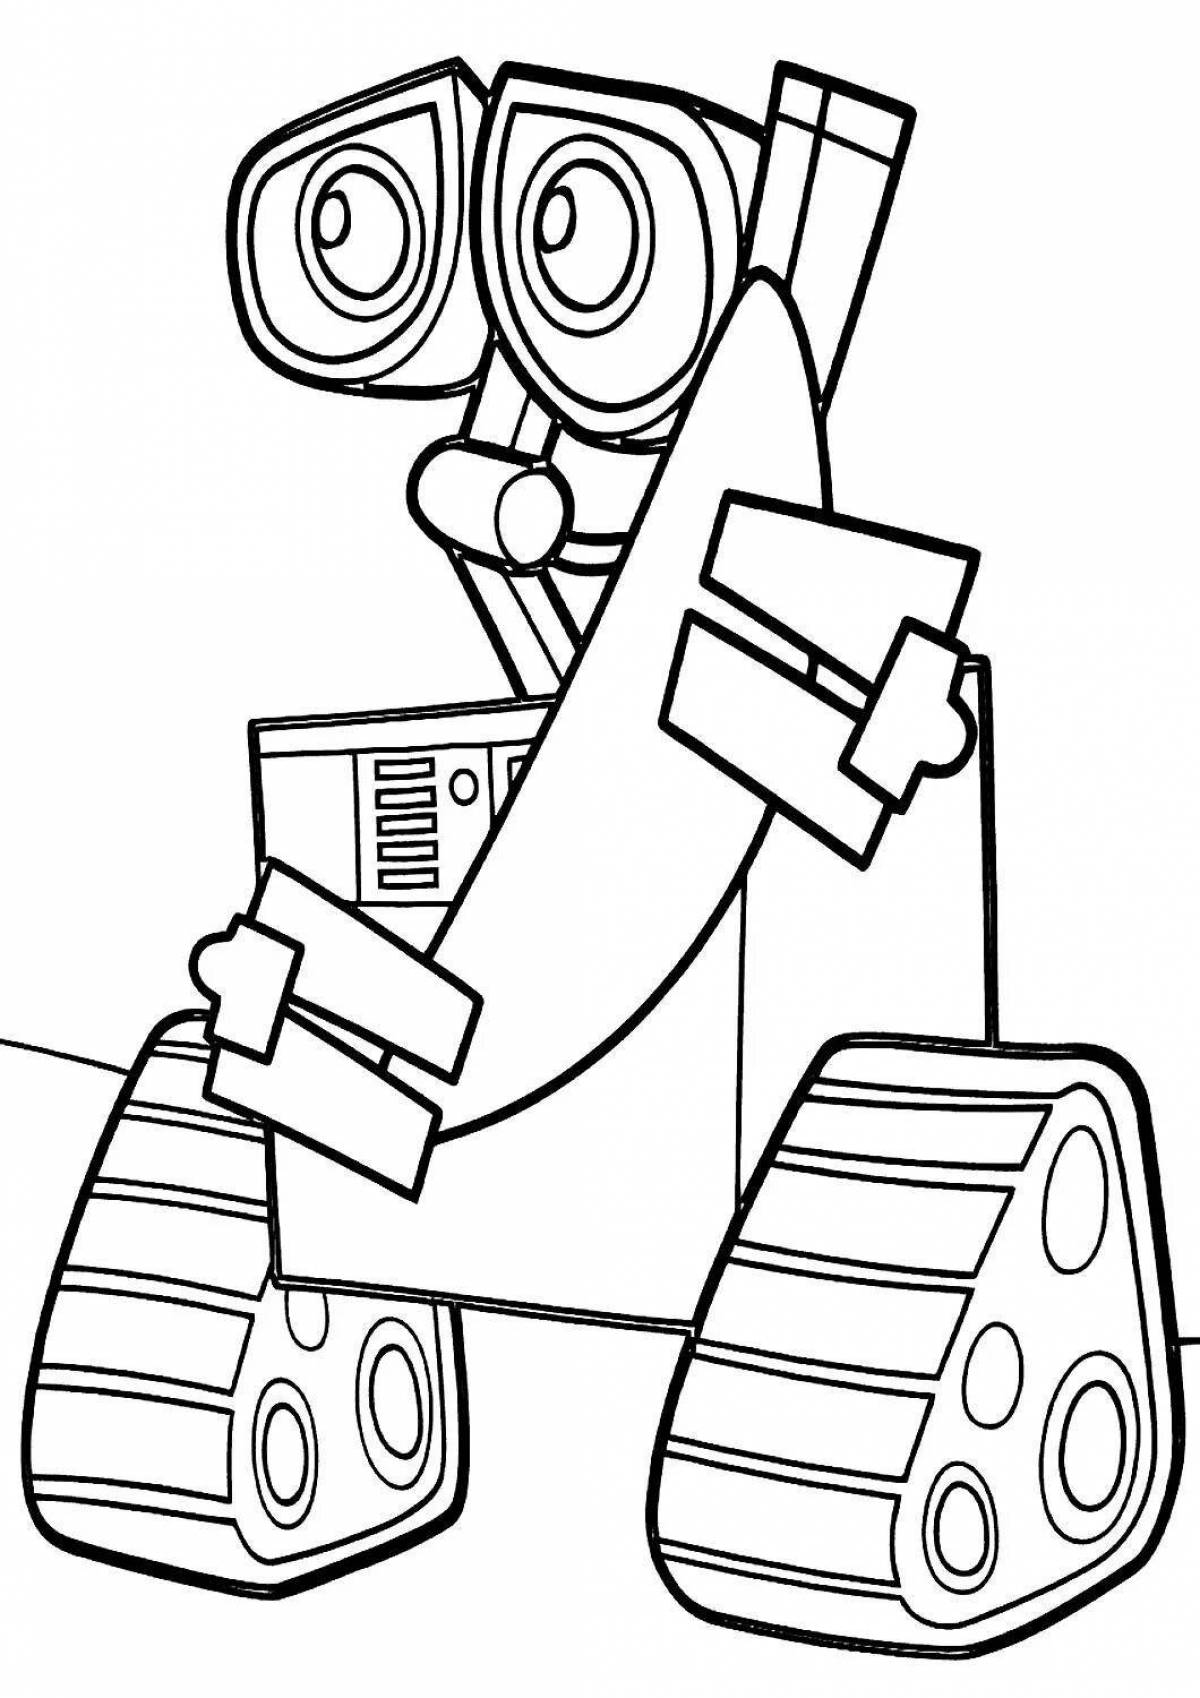 Glowing Robot Valley coloring page